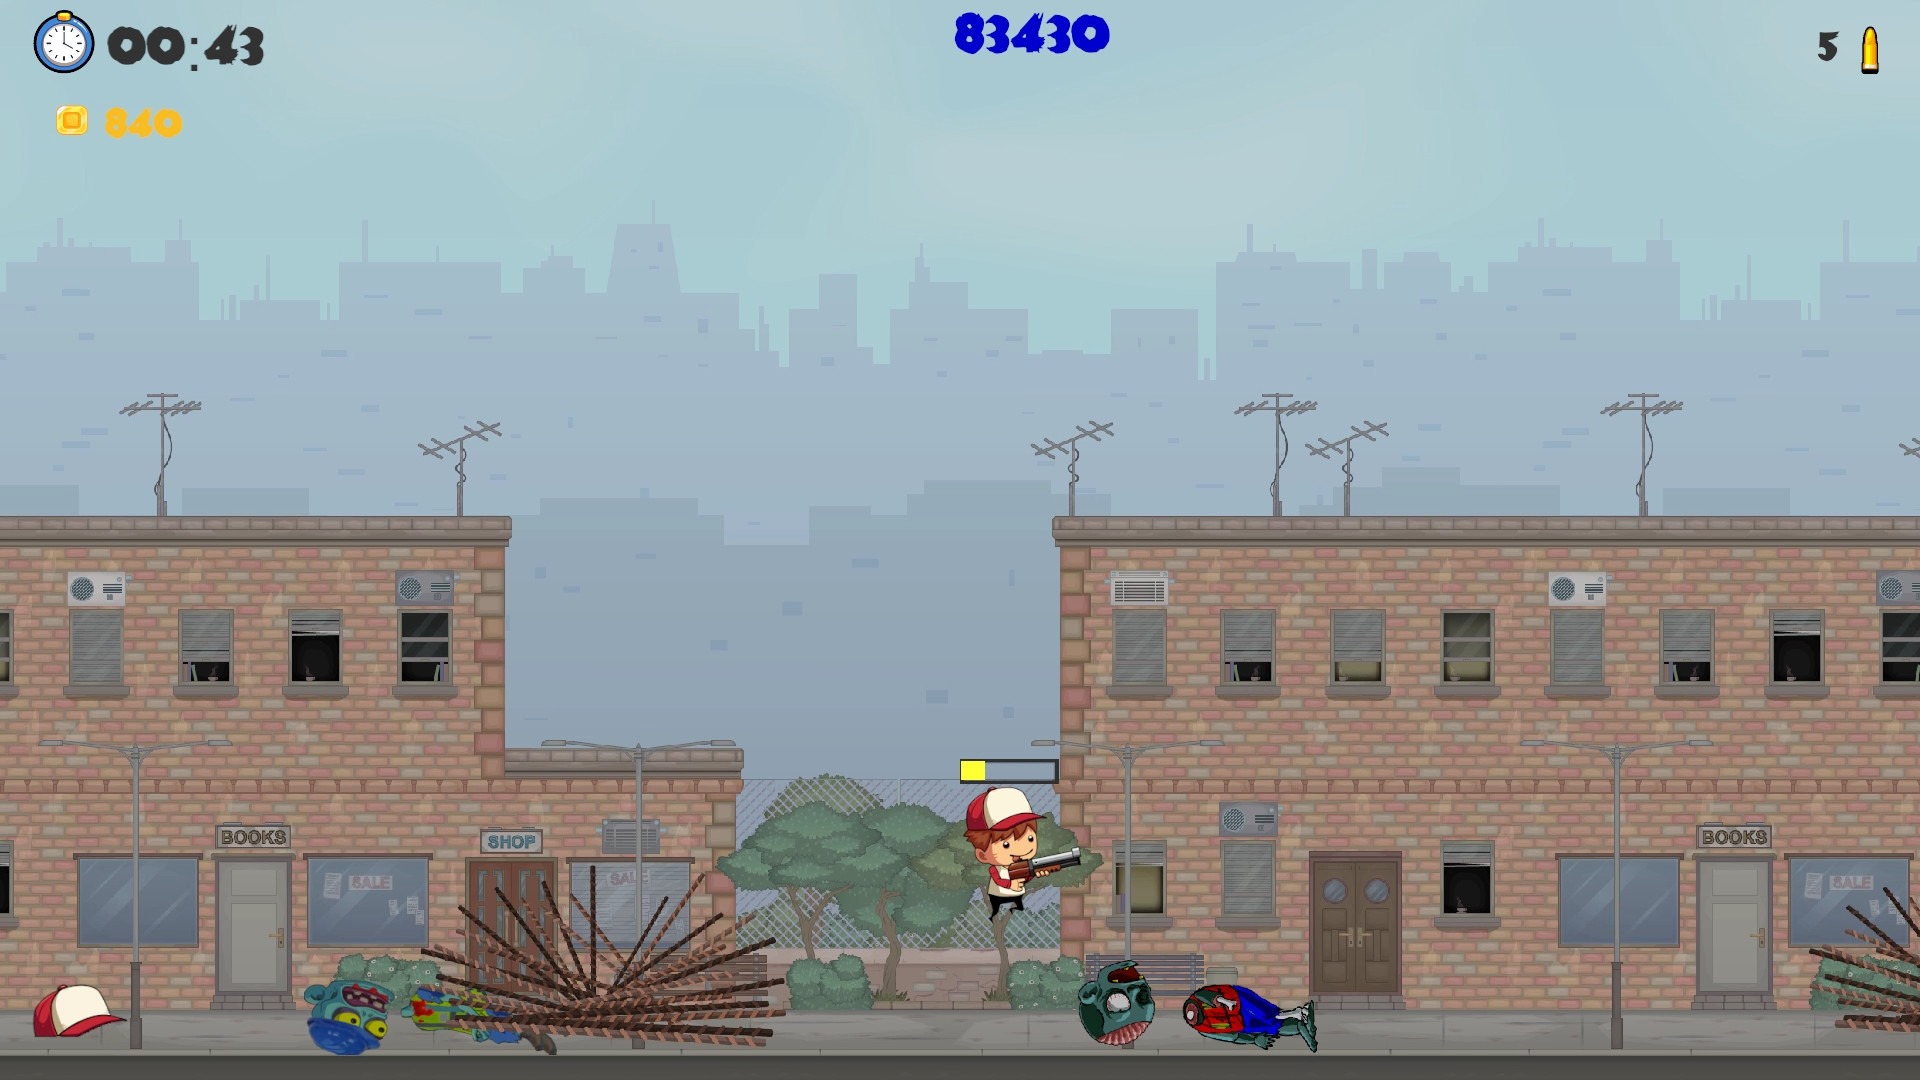 Red Cap Zombie Hunter Free Download